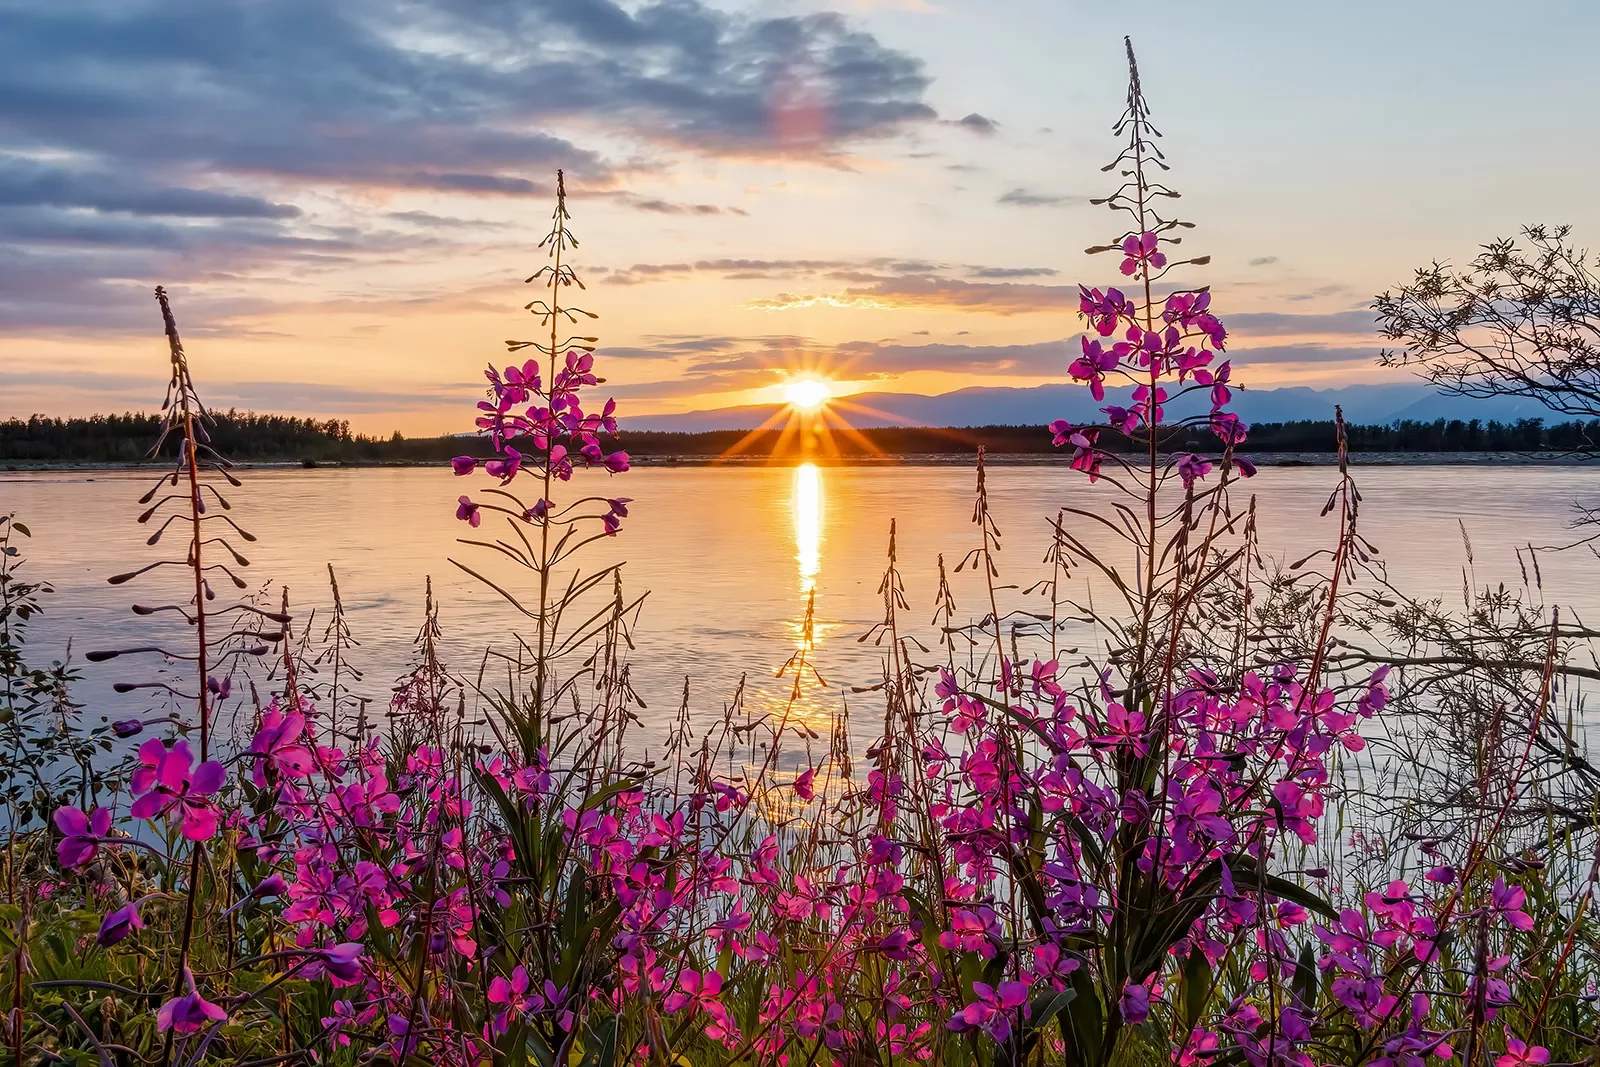 Flowers on the edge of a lake at sunset in Alaska